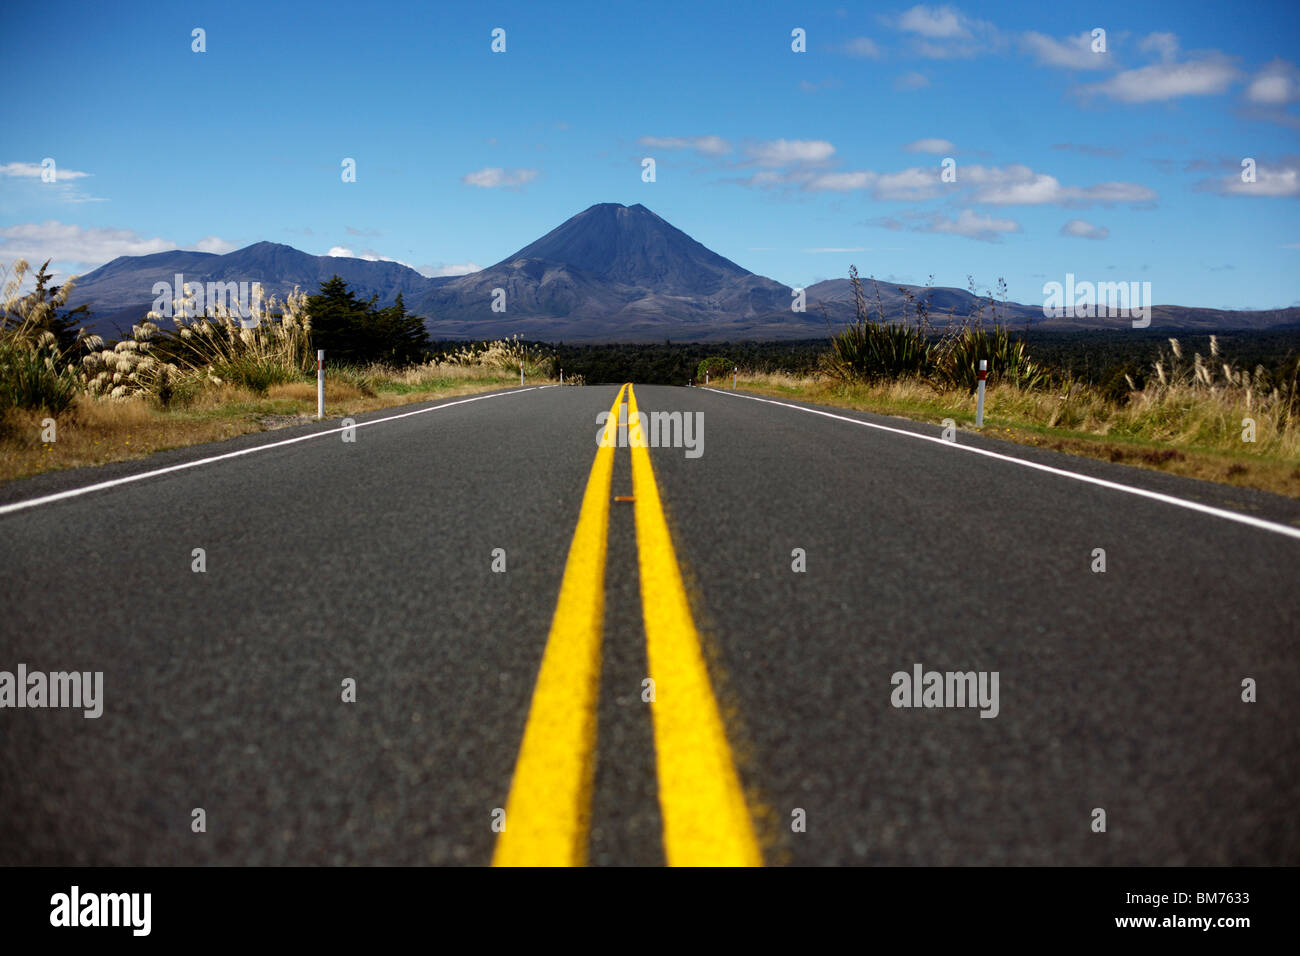 State Highway 47 heading towards Mount Ngauruhoe in the Tongariro National Park in New Zealand Stock Photo